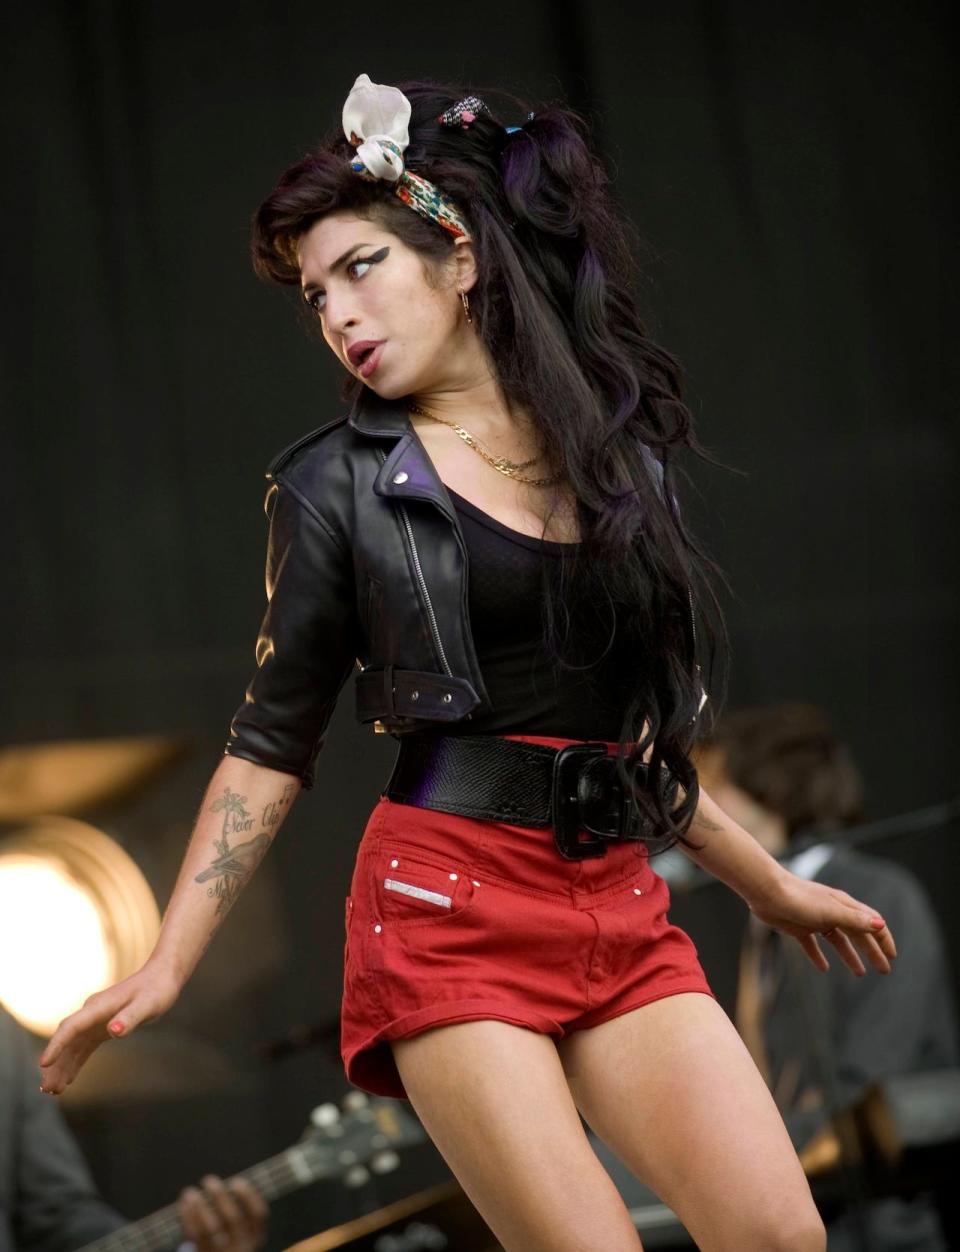 Amy Winehouse performing at T in the Park festival in 2008.